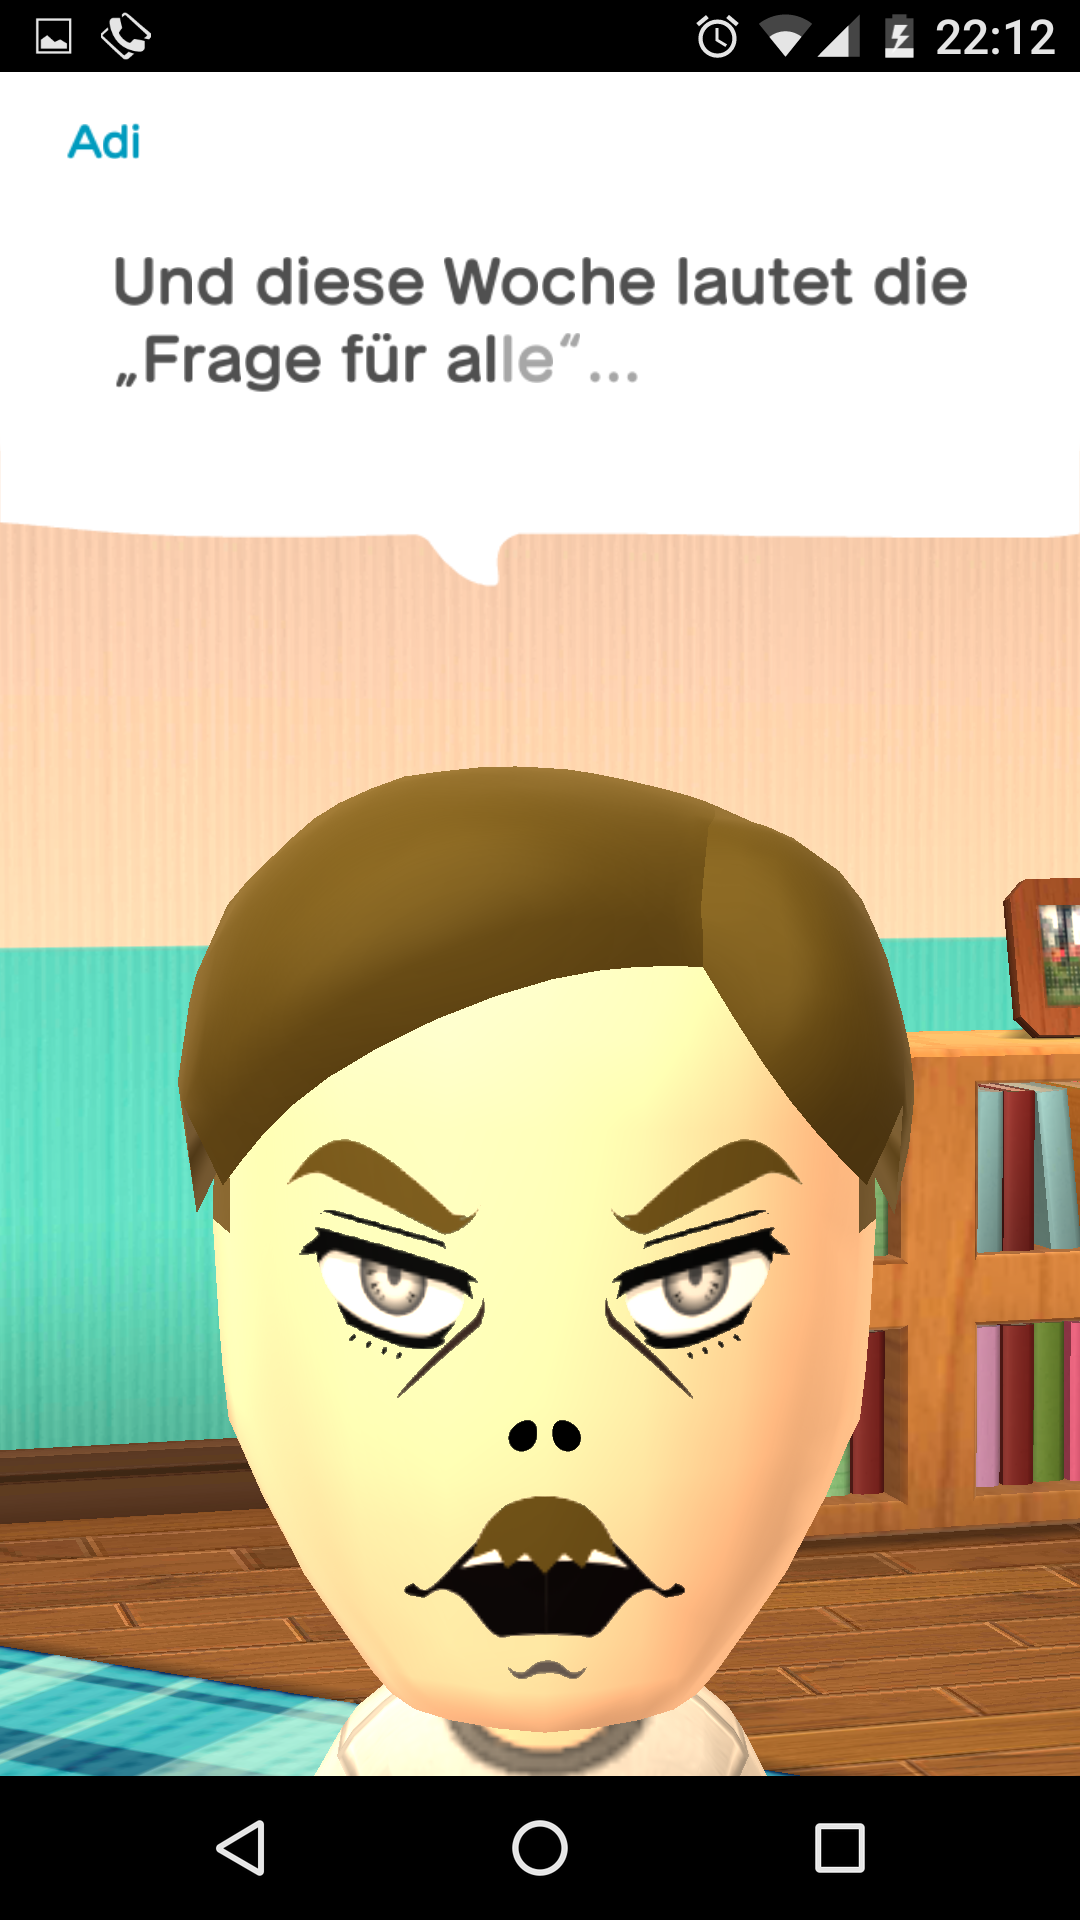 You can make some charismatic looking Miis with this Miitomo thing